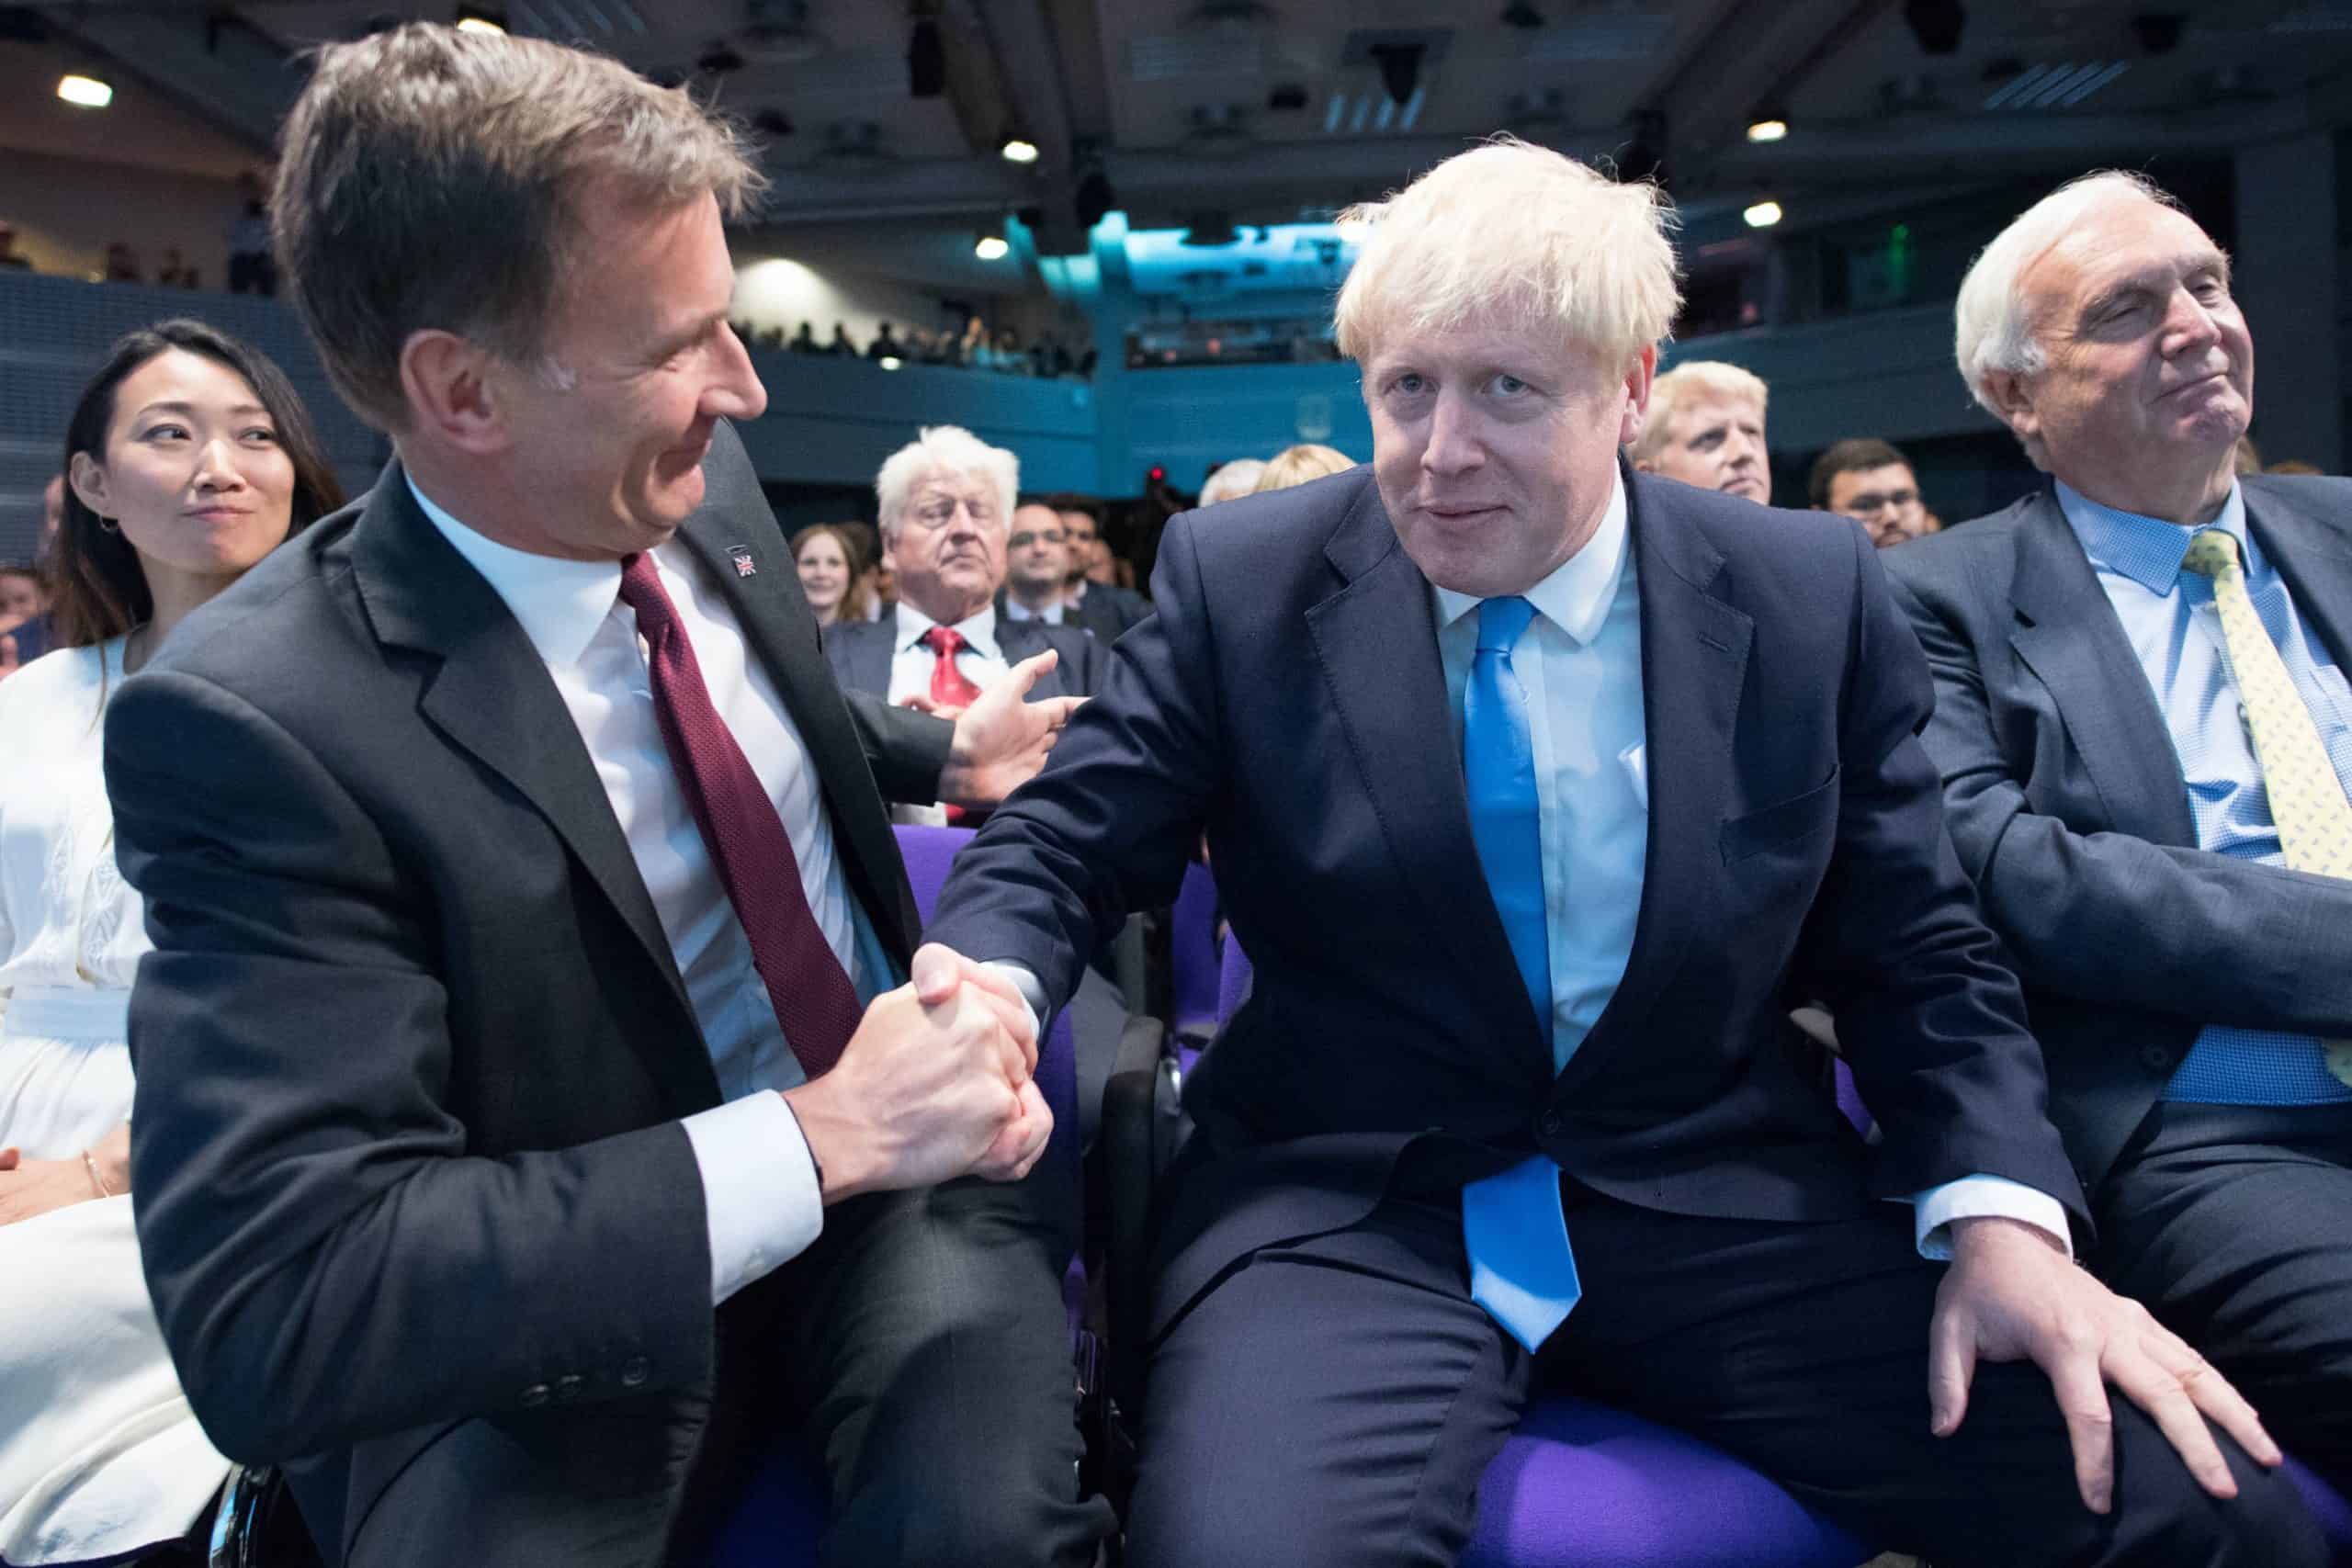 Tax middle-aged Brits to fund social care, Jeremy Hunt tells Boris